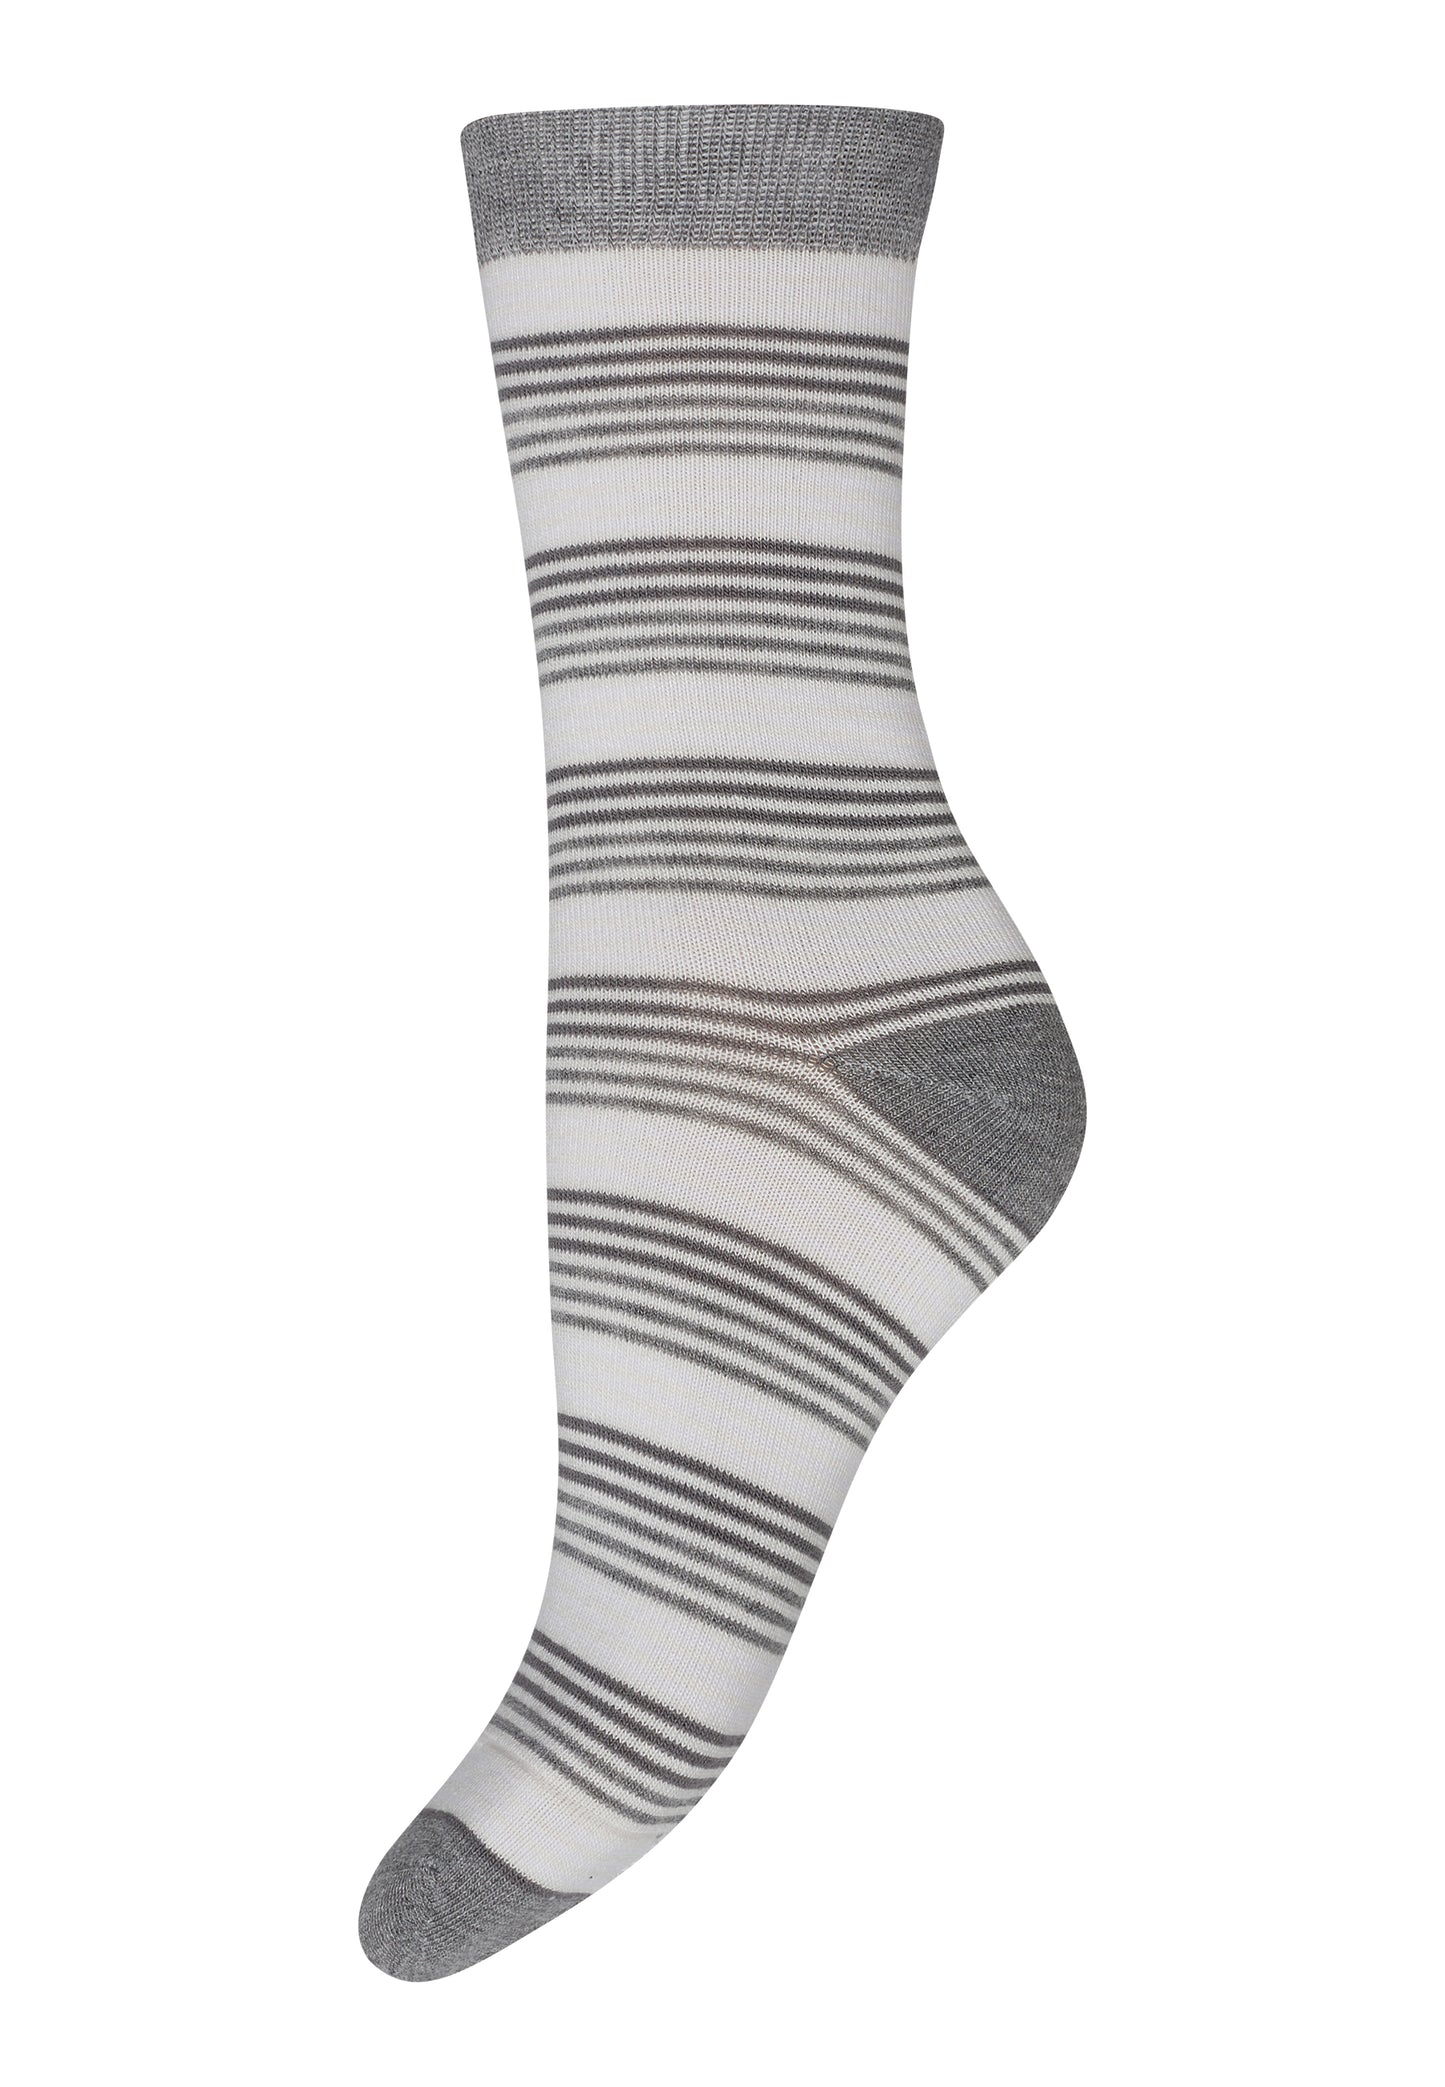 Decoy - Ankle 3-pack Gray patterned